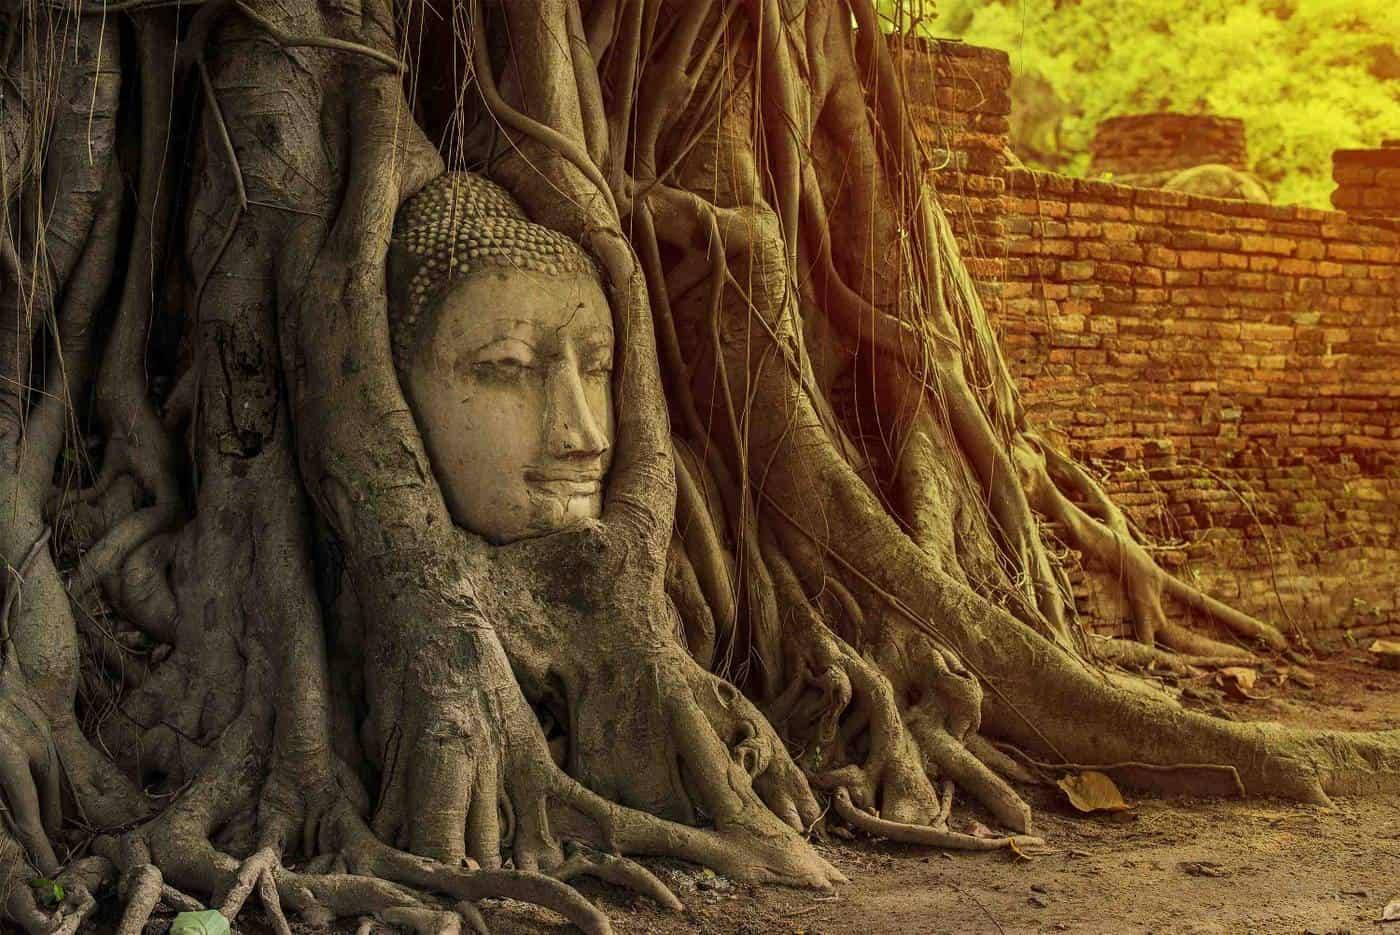 DISCOVER AYUTTHAYA – A SHOWPIECE OF SIAM